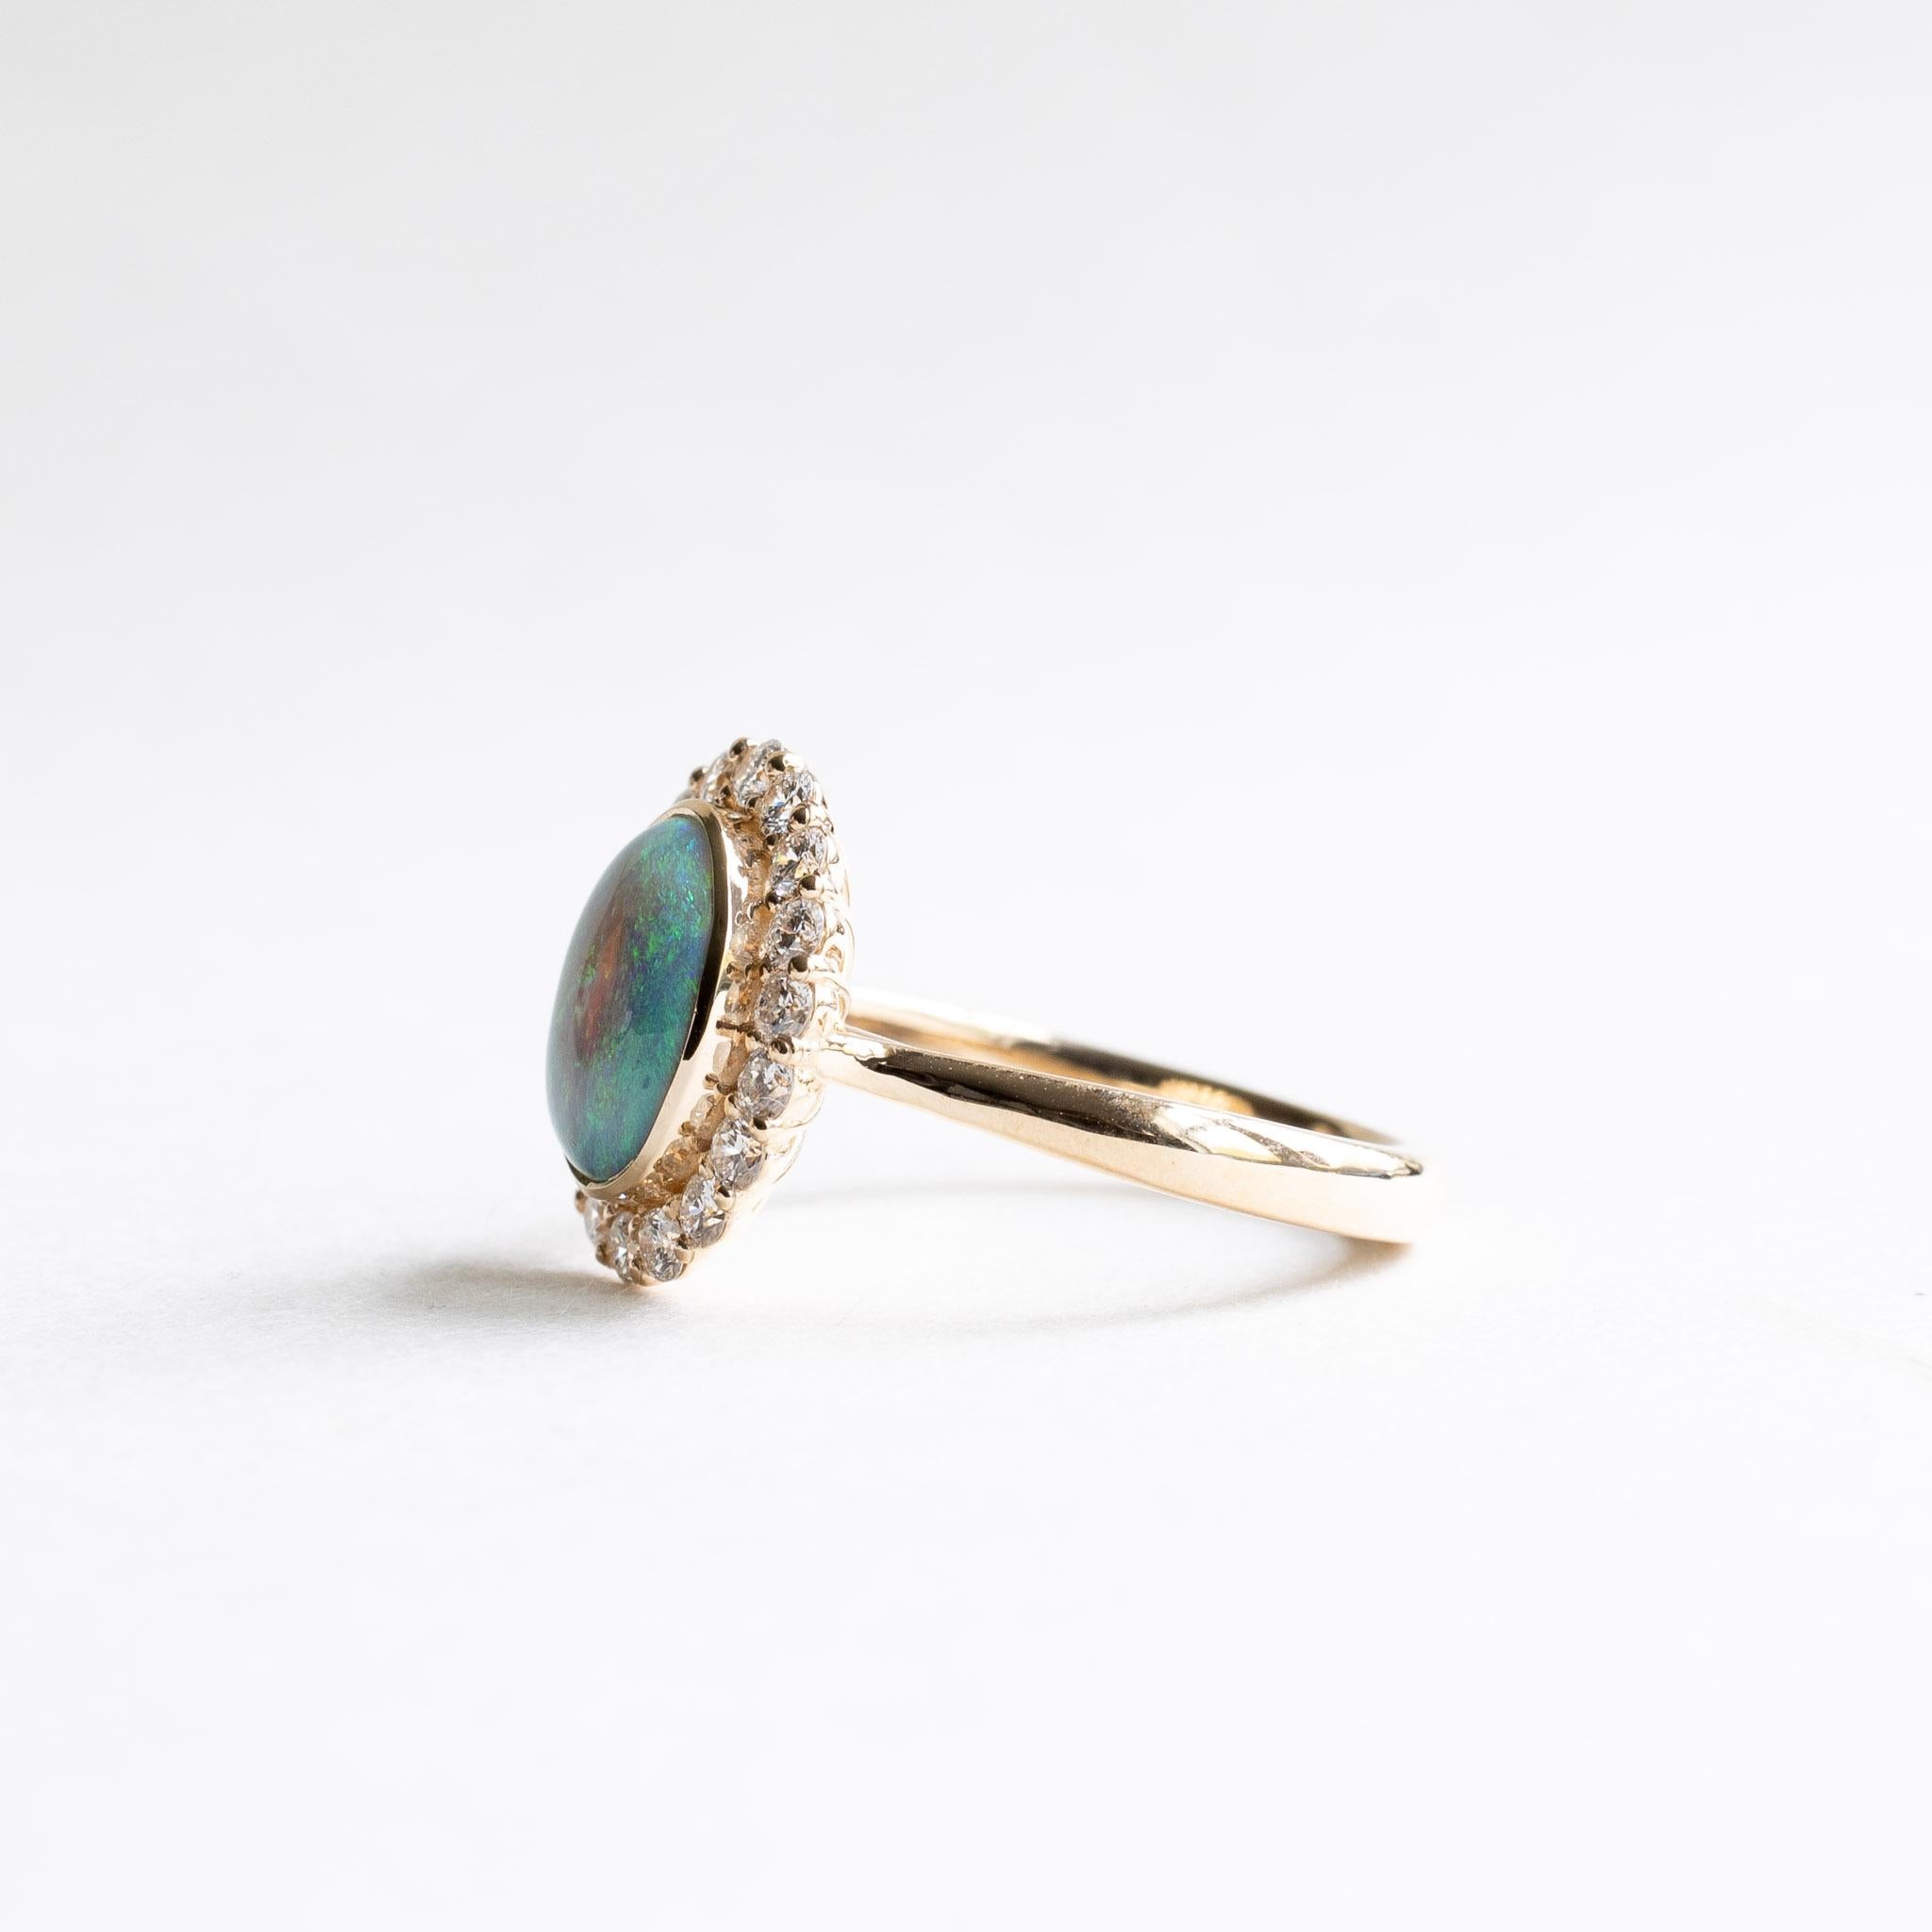 18k 1.66 Carat Australian Opal Halo Ring, Cocktail Ring In New Condition For Sale In Wallingford, CT